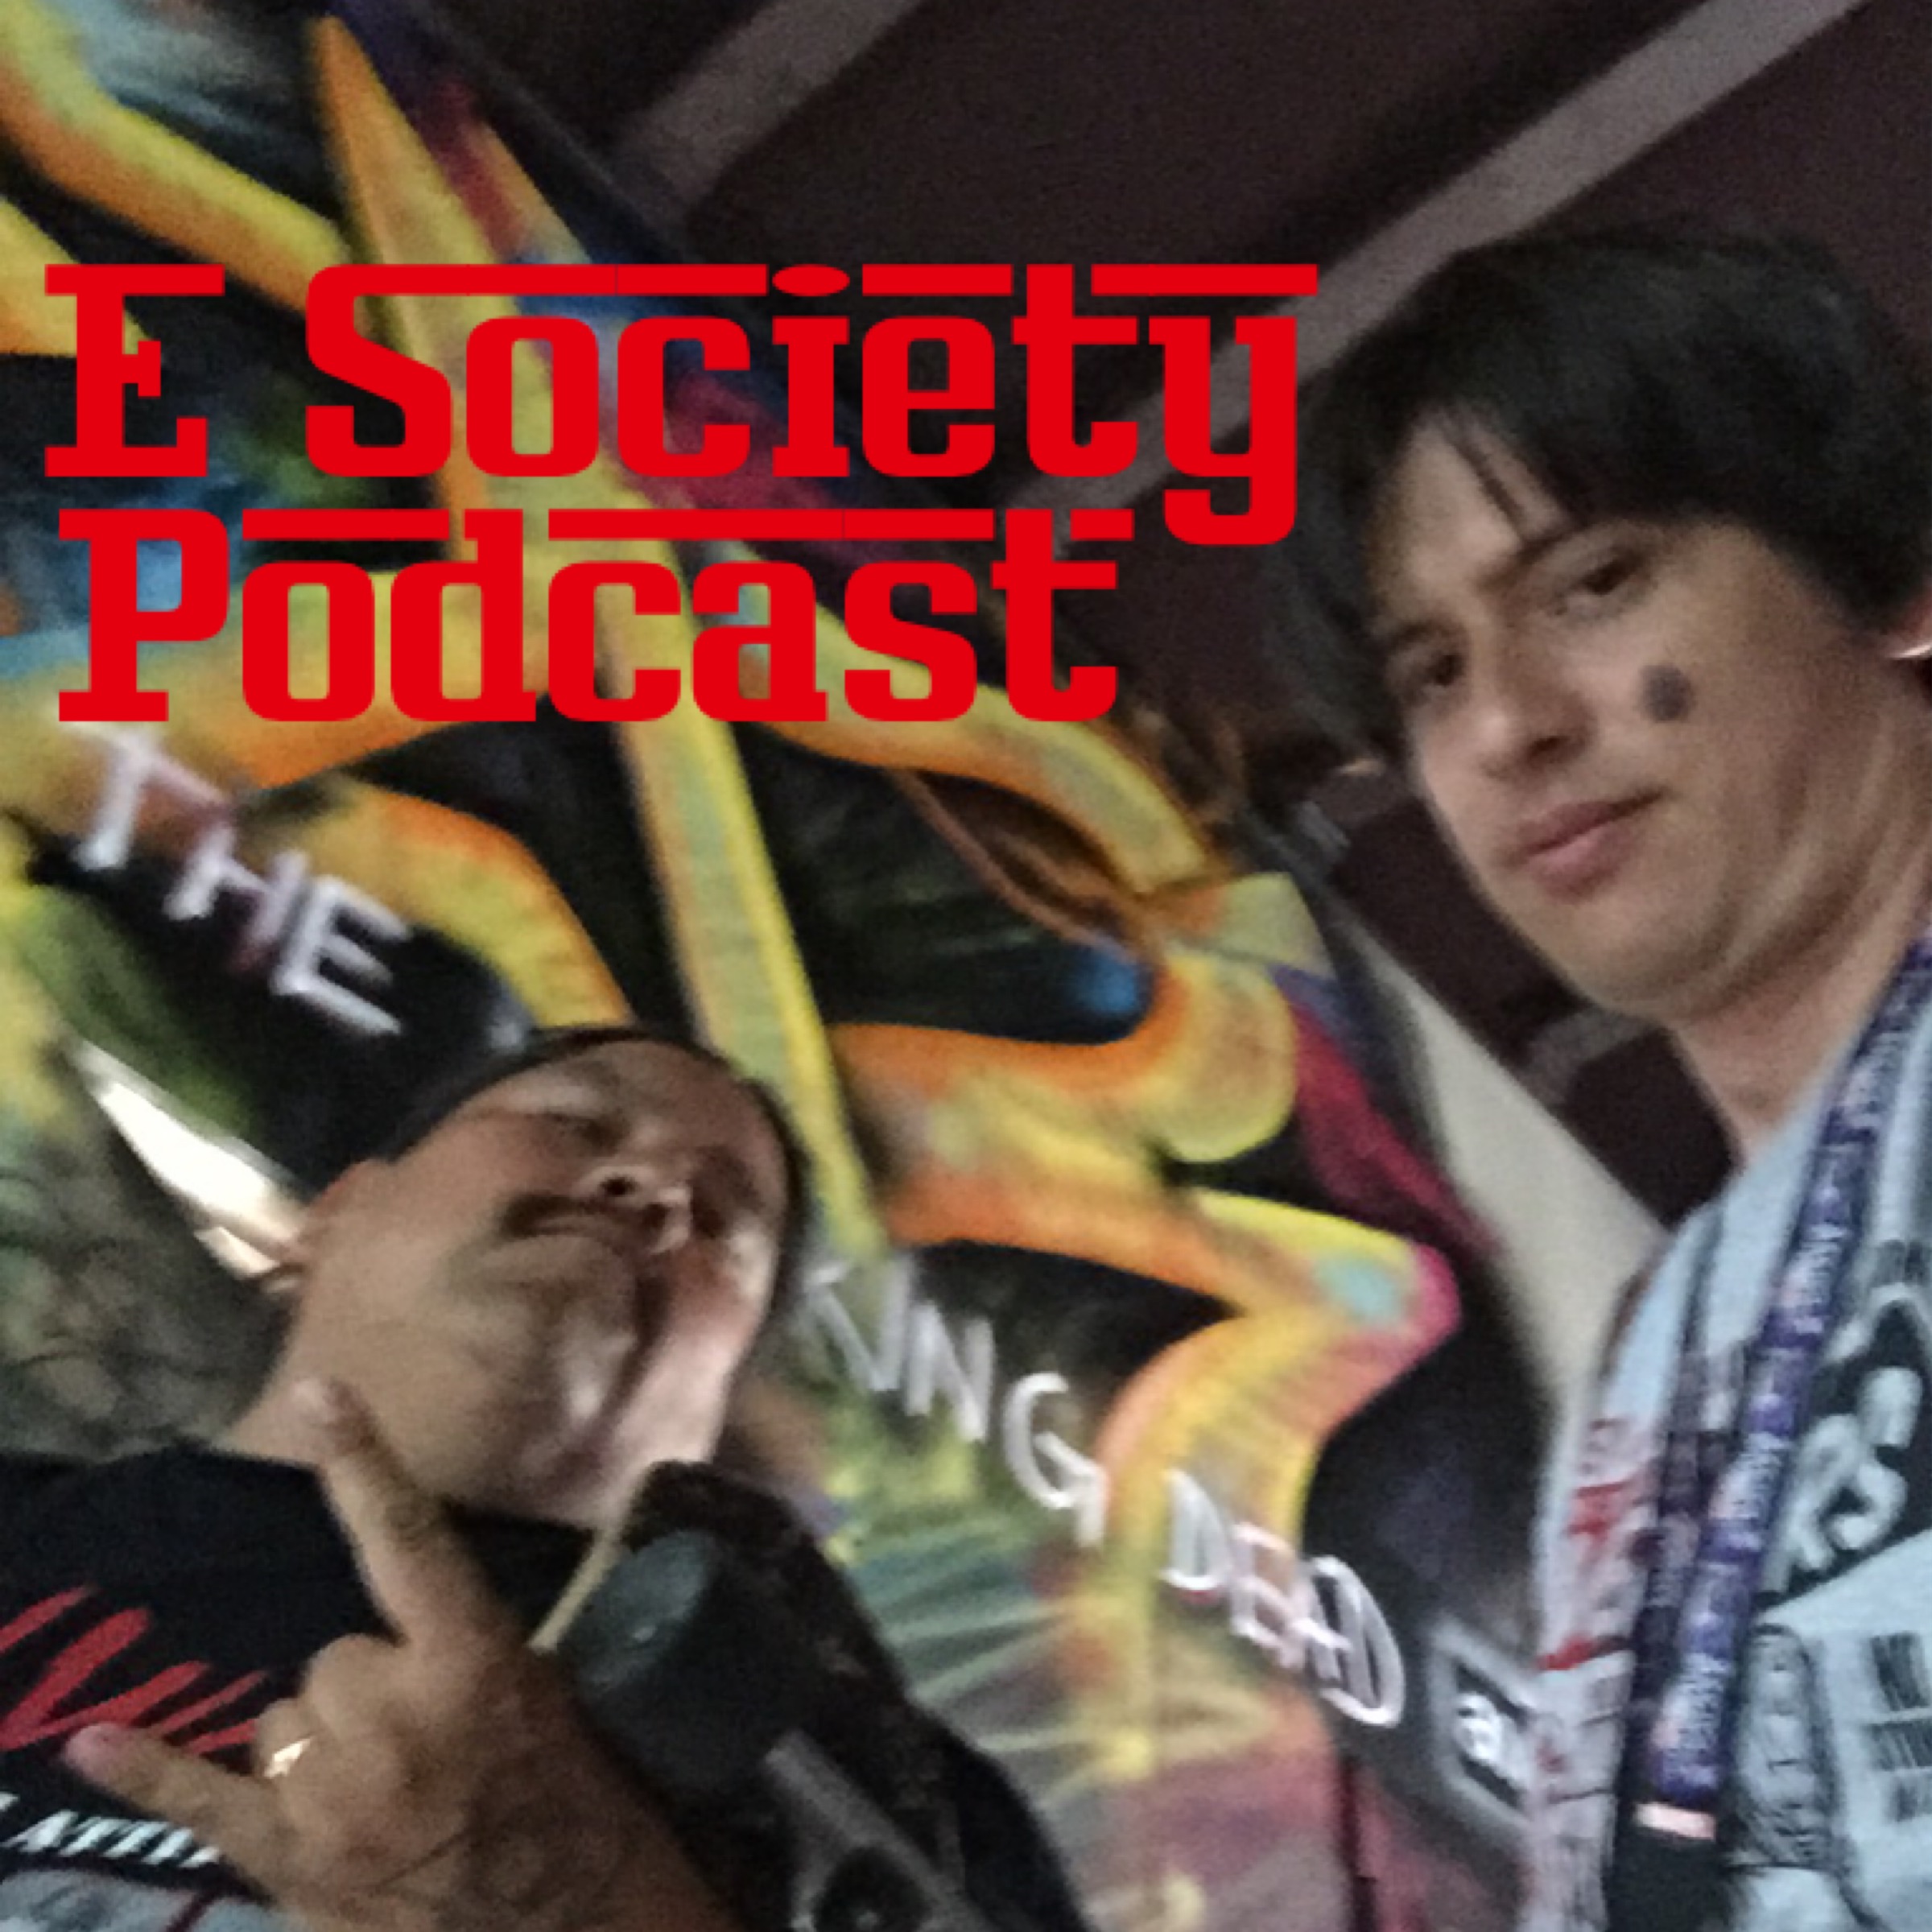 E Society Podcast - Ep. 11: Got anymore of those podcasts?